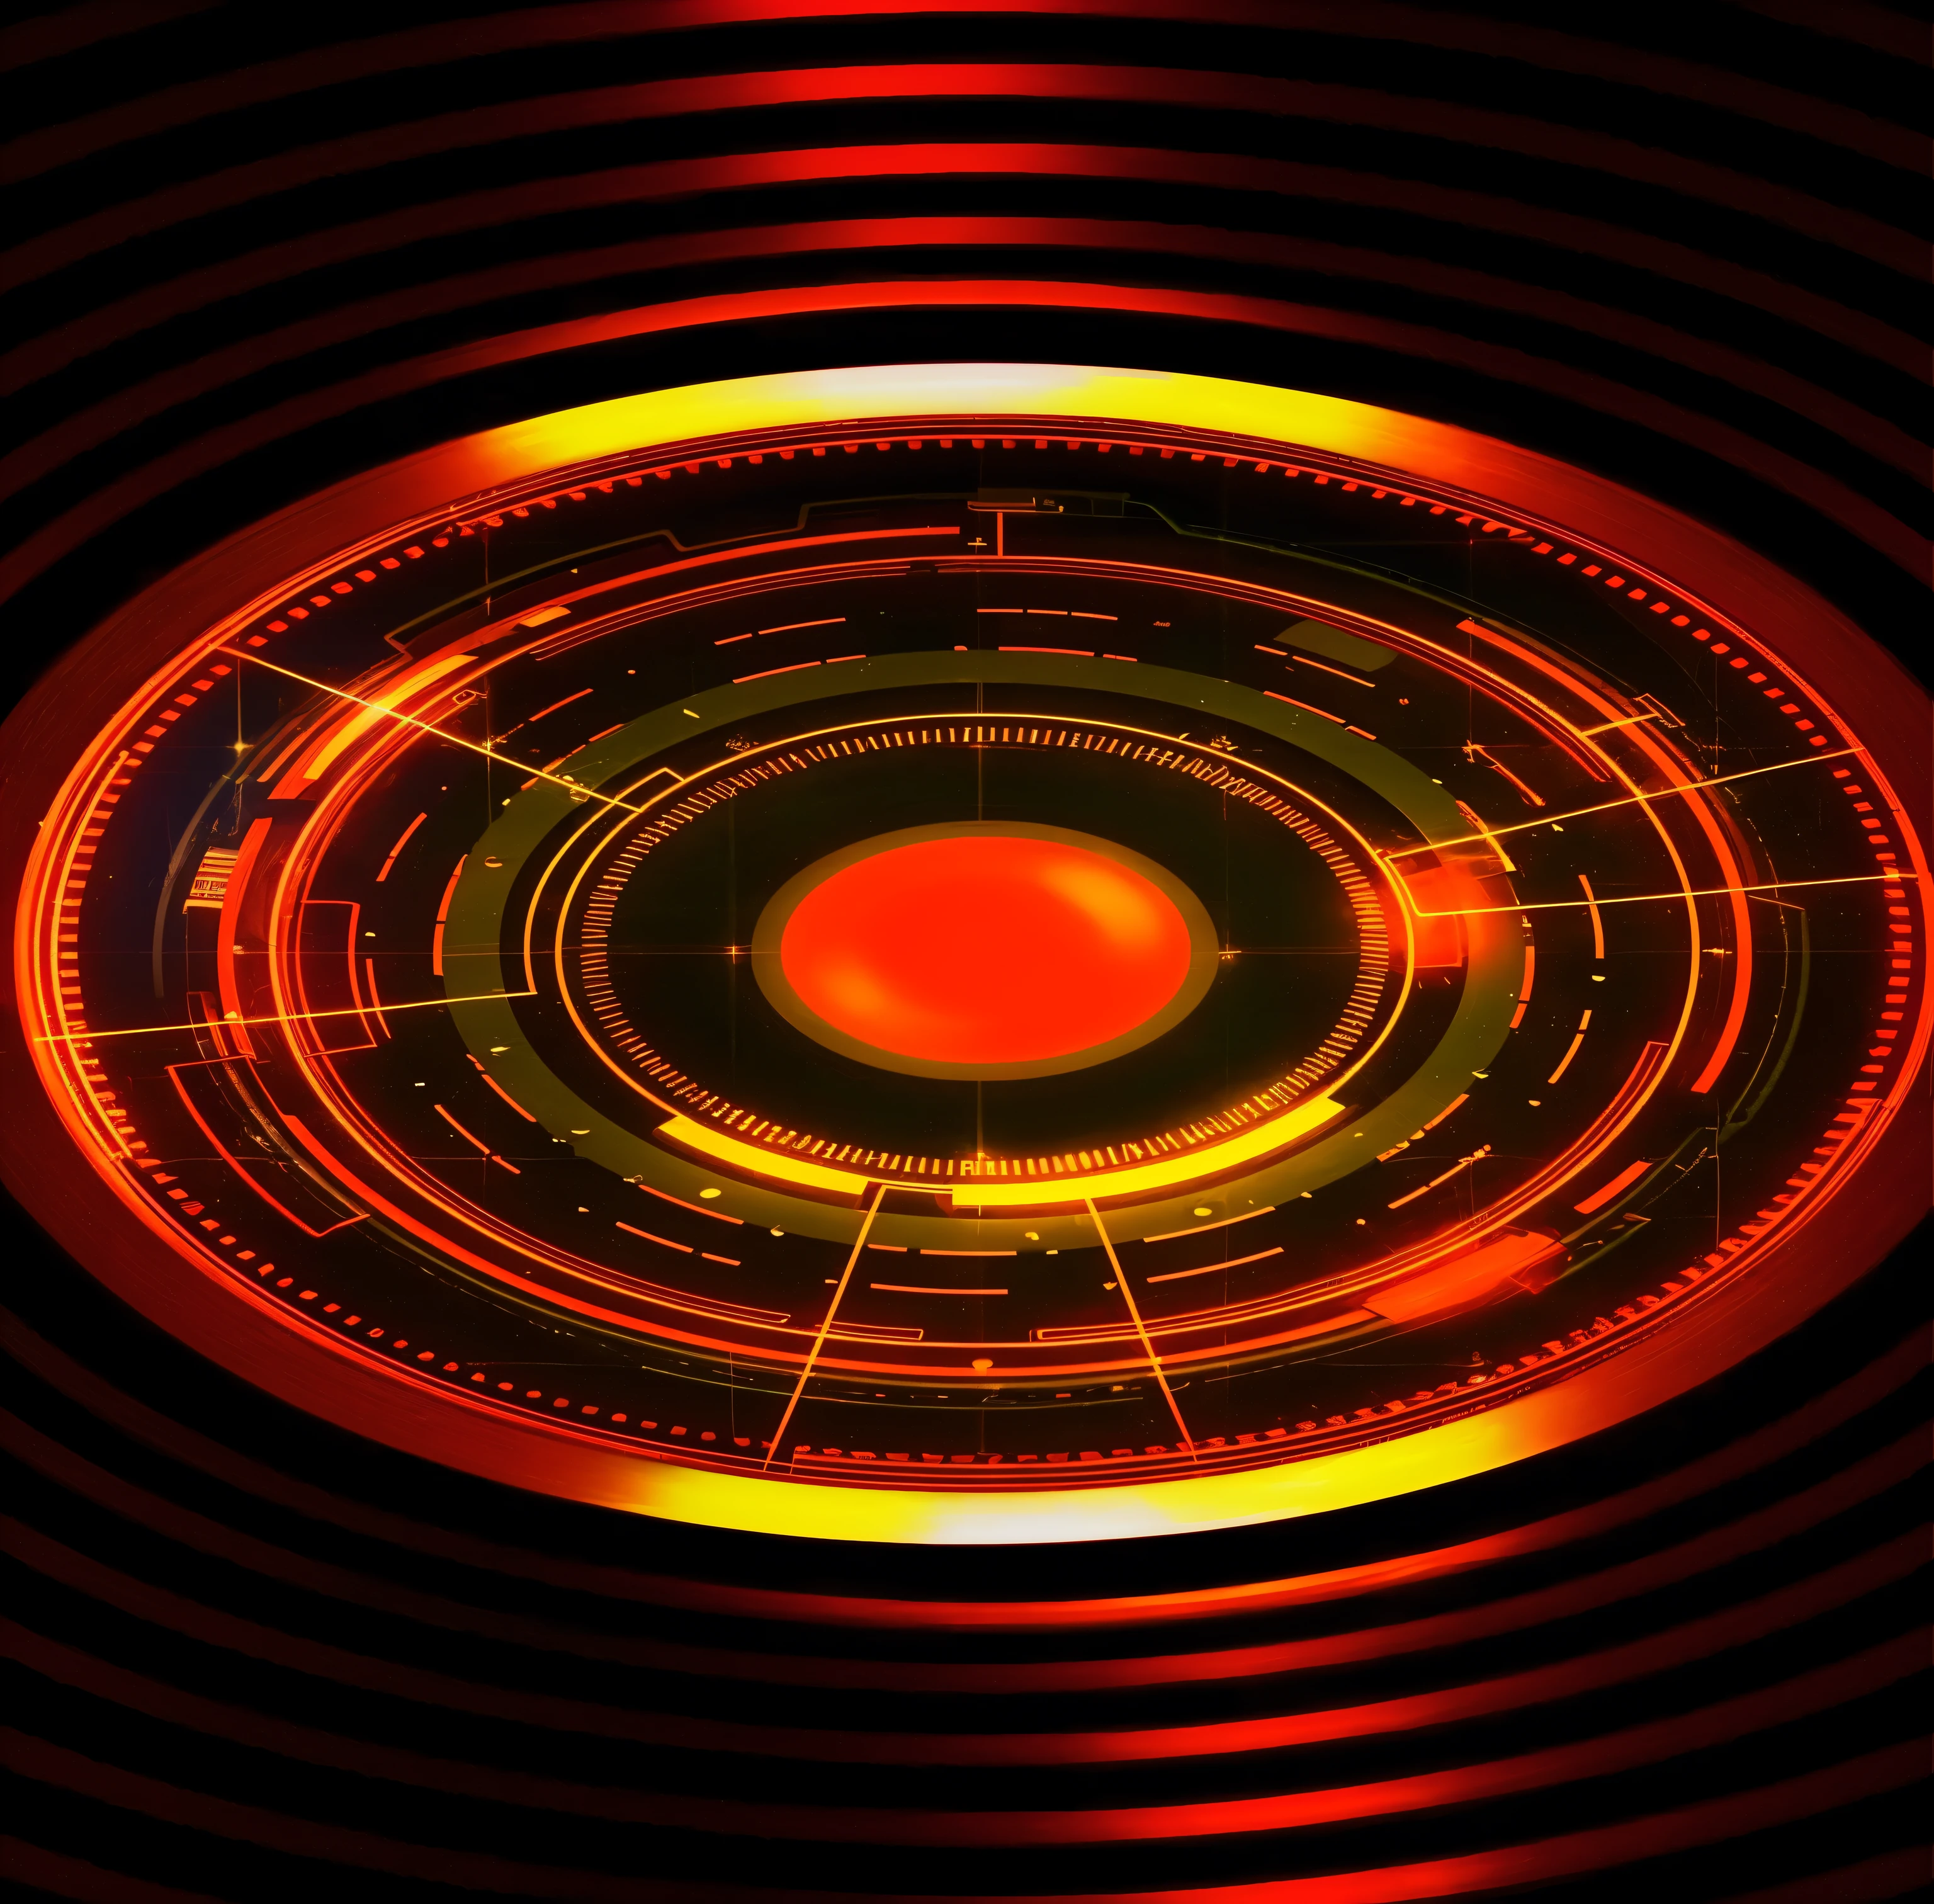 a close up of a circular object with a red light, technological rings, digital illustration radiating, abstract tech, fractal burning halo, cyber background, digital yellow red sun, techno neon projector background, futuristic background, computer generated, round background, glowing epicentre, technological lights, neon circles, accretion disk, background of digital greebles, futuristic digital art